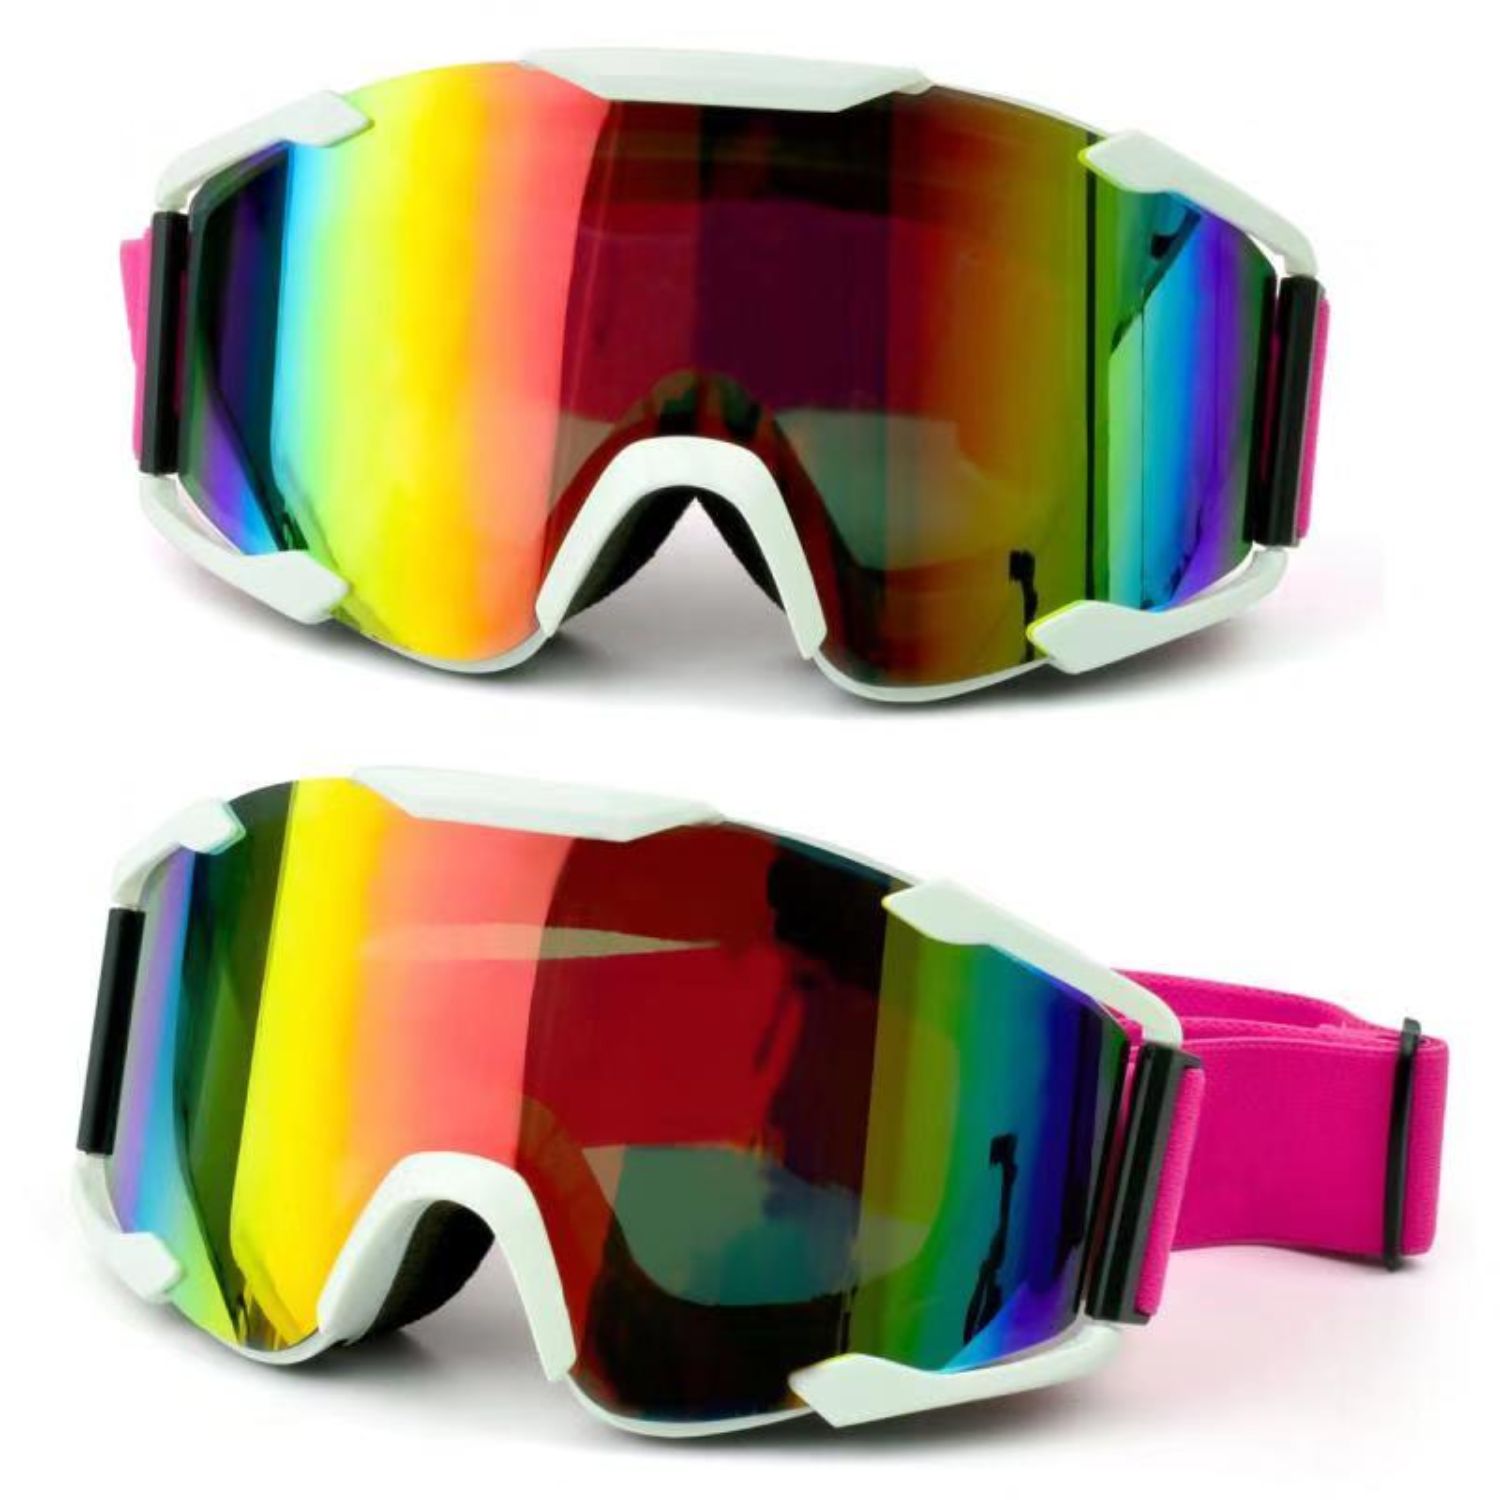 SG05 - Ski Snowboard GOGGLES for Men and Women with UV Protection